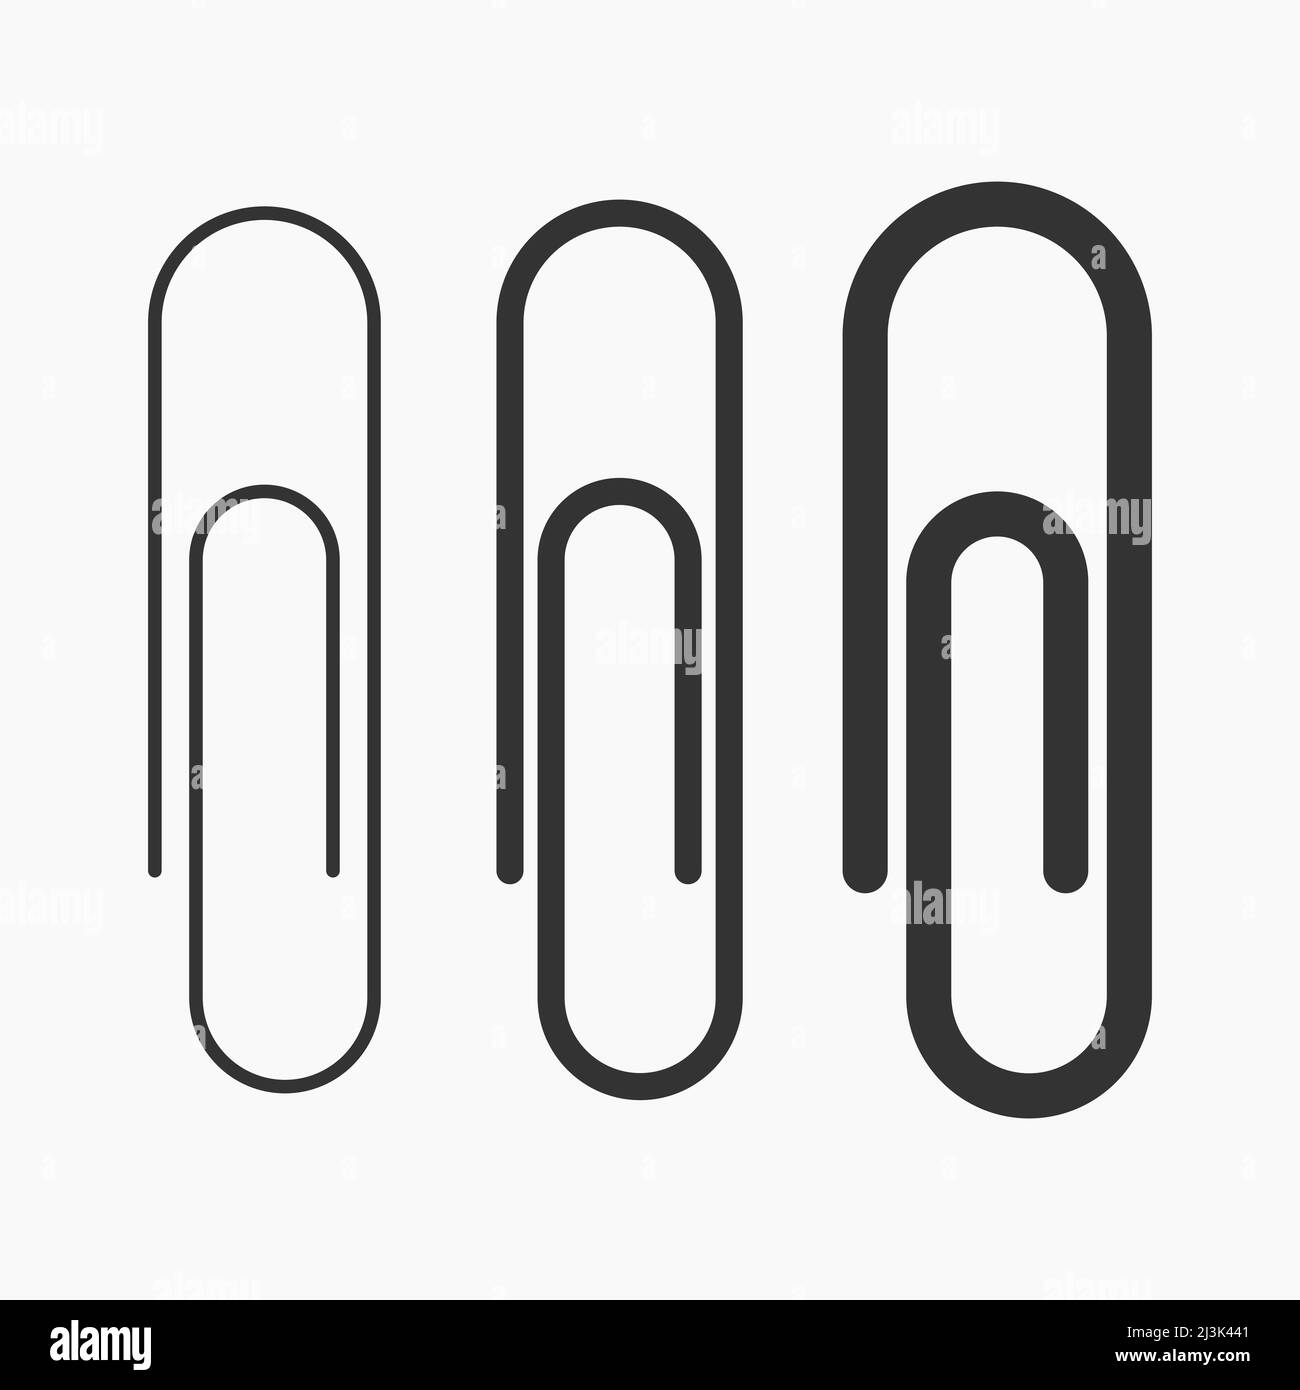 paper clip thin and thick icon vector flat illustration Stock Vector